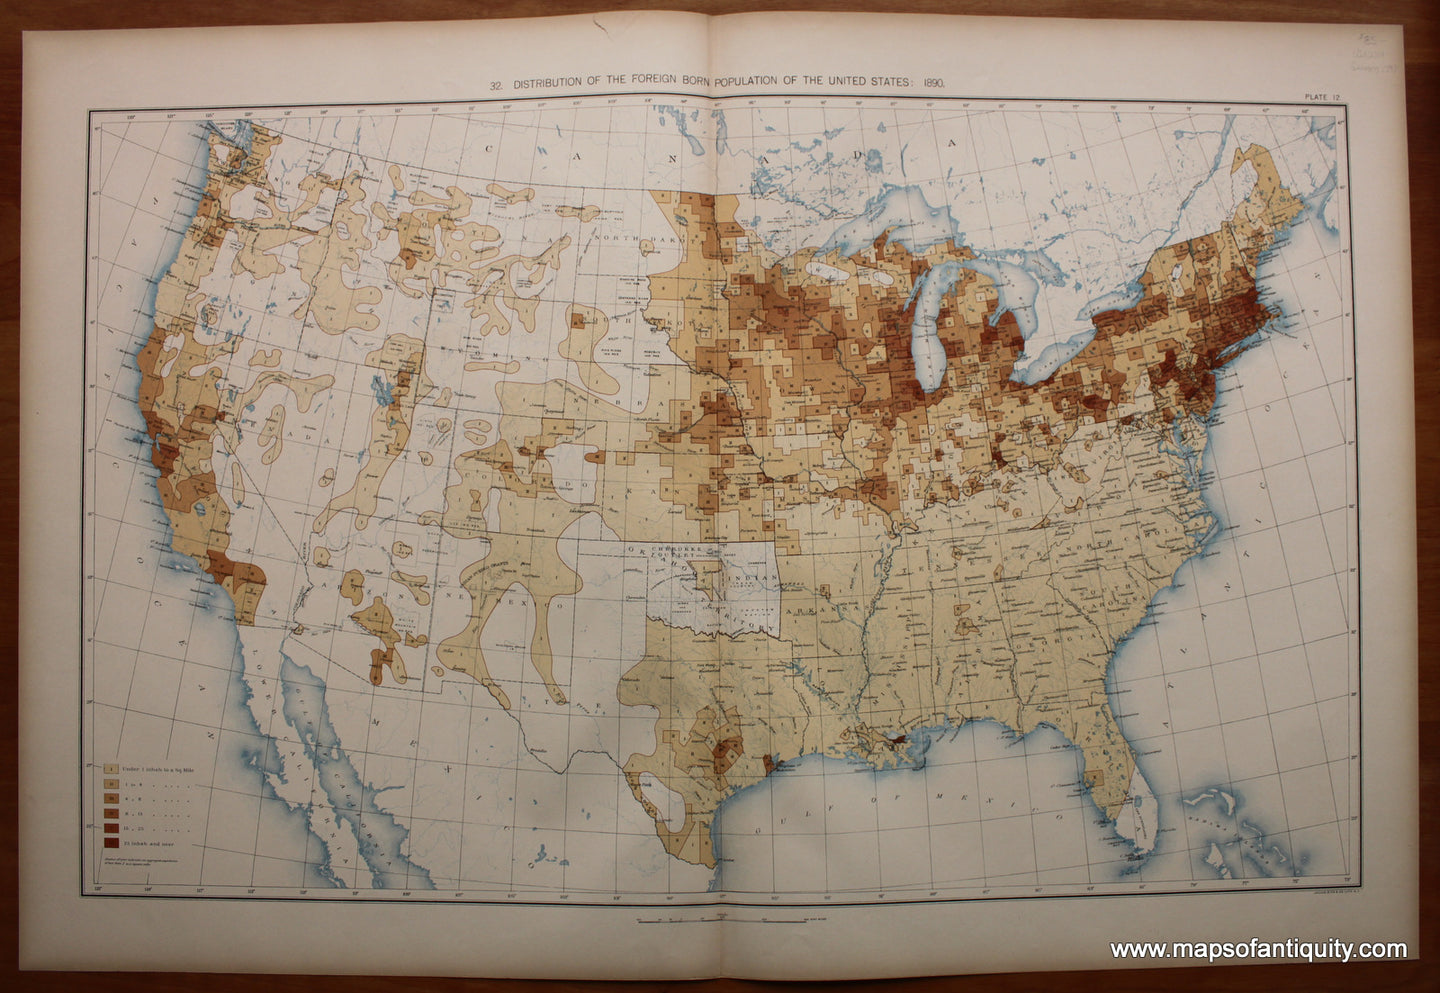 Antique-Printed-Color-Map-Distribution-of-the-Foreign-Born-Population-of-The-United-States:-1890-United-States-United-States-General-1898-Gannett-Maps-Of-Antiquity